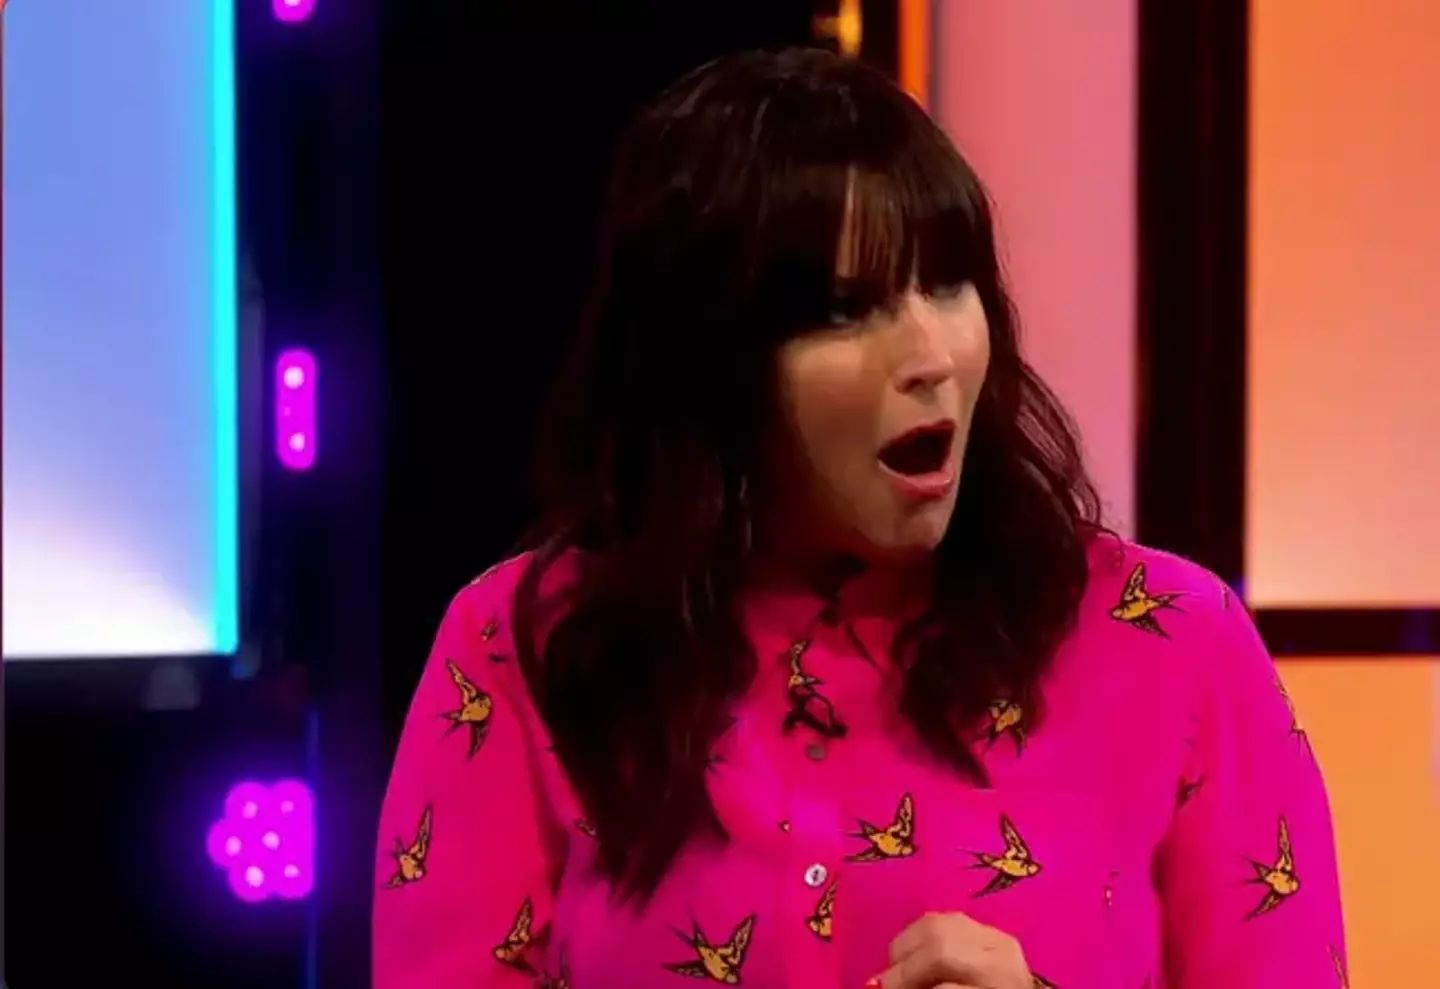 Anna Richardson was shocked to say the least.